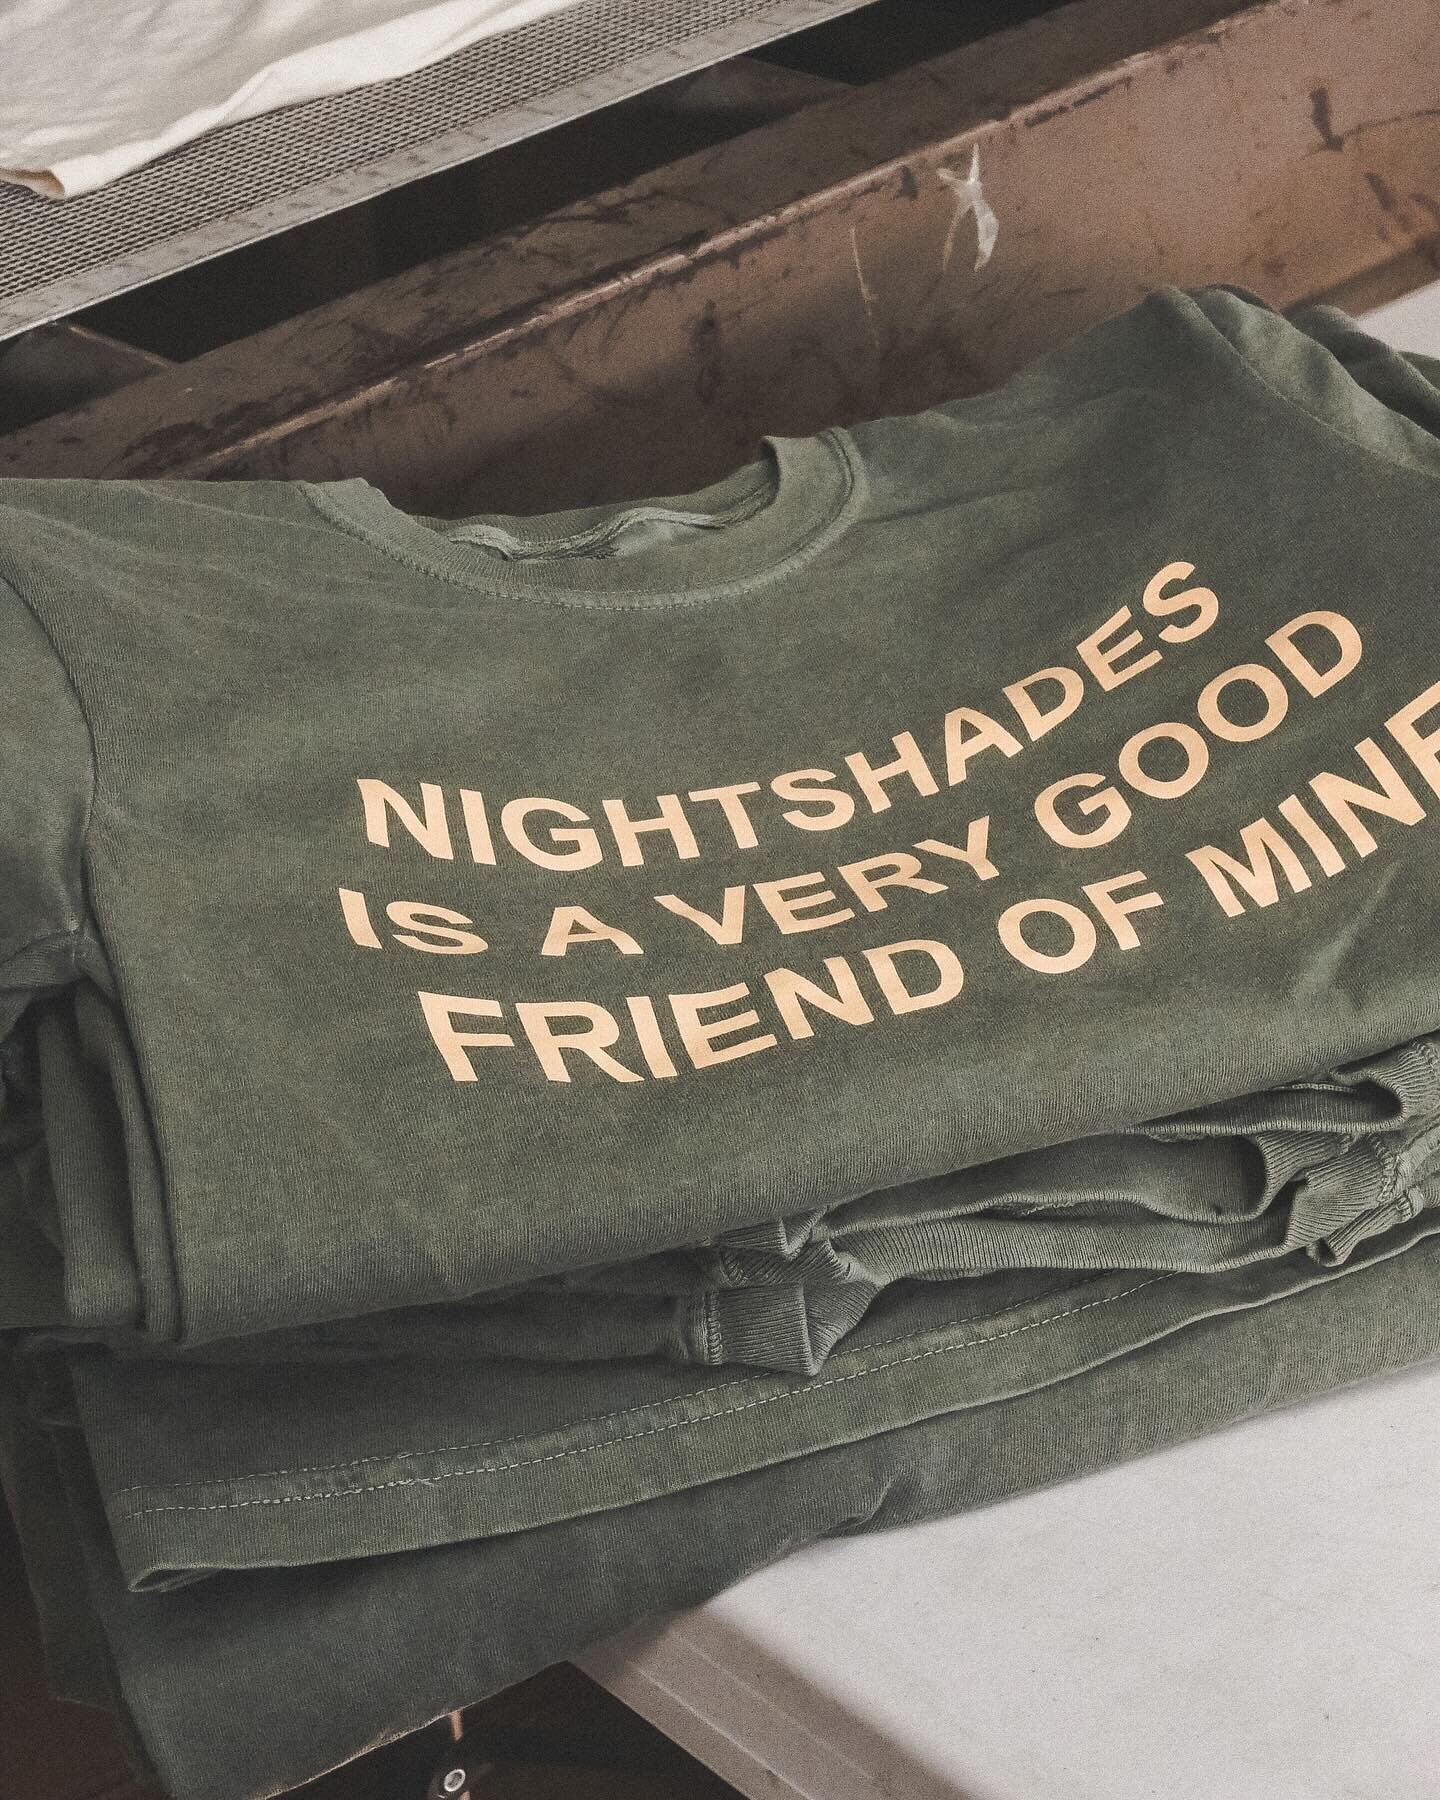 Hi fam!

We couldn&rsquo;t be happier with how these tees turned out for our friends in @nightshadestheband !

They juuuust released an incredible psychedelic pop / post-punk rock n&rsquo; roll EP called Yellow &amp; Green that is melting our brains 